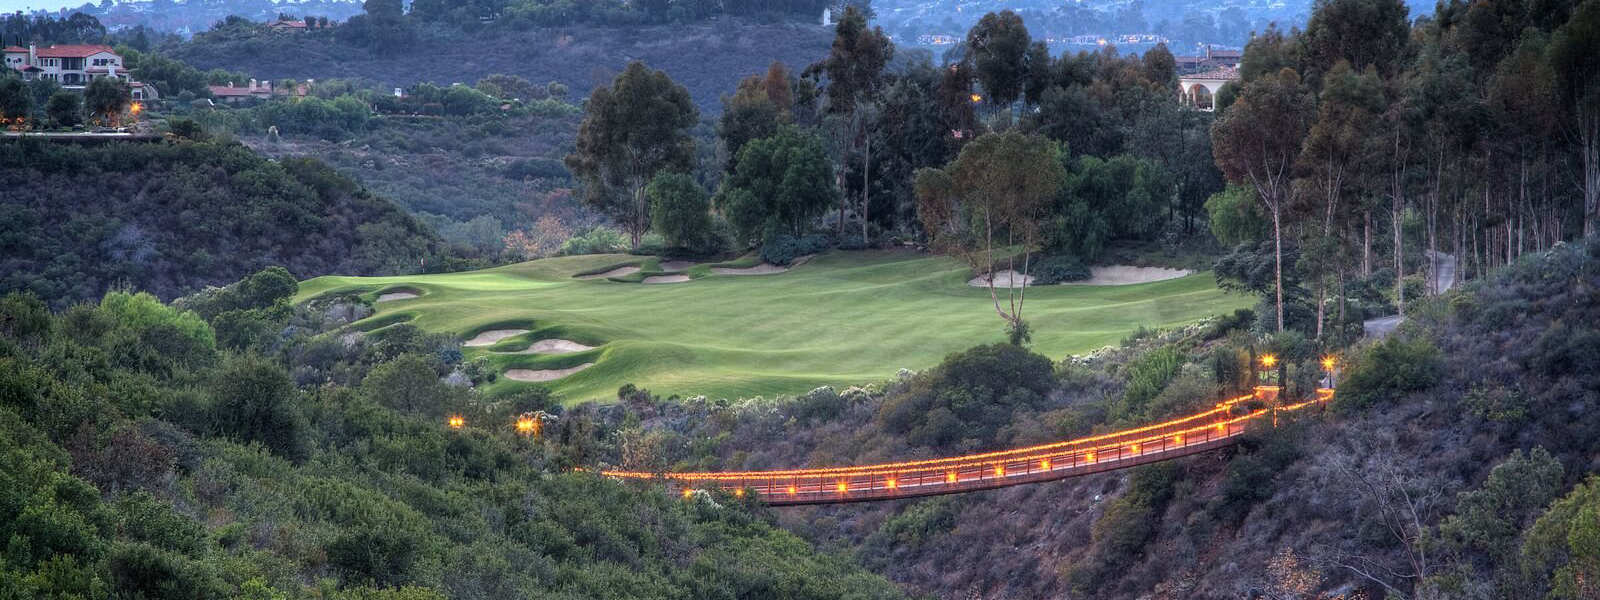 Robert Trent Jones II is unrivaled in golf course architecture in the heart of Rancho Sante Fe.